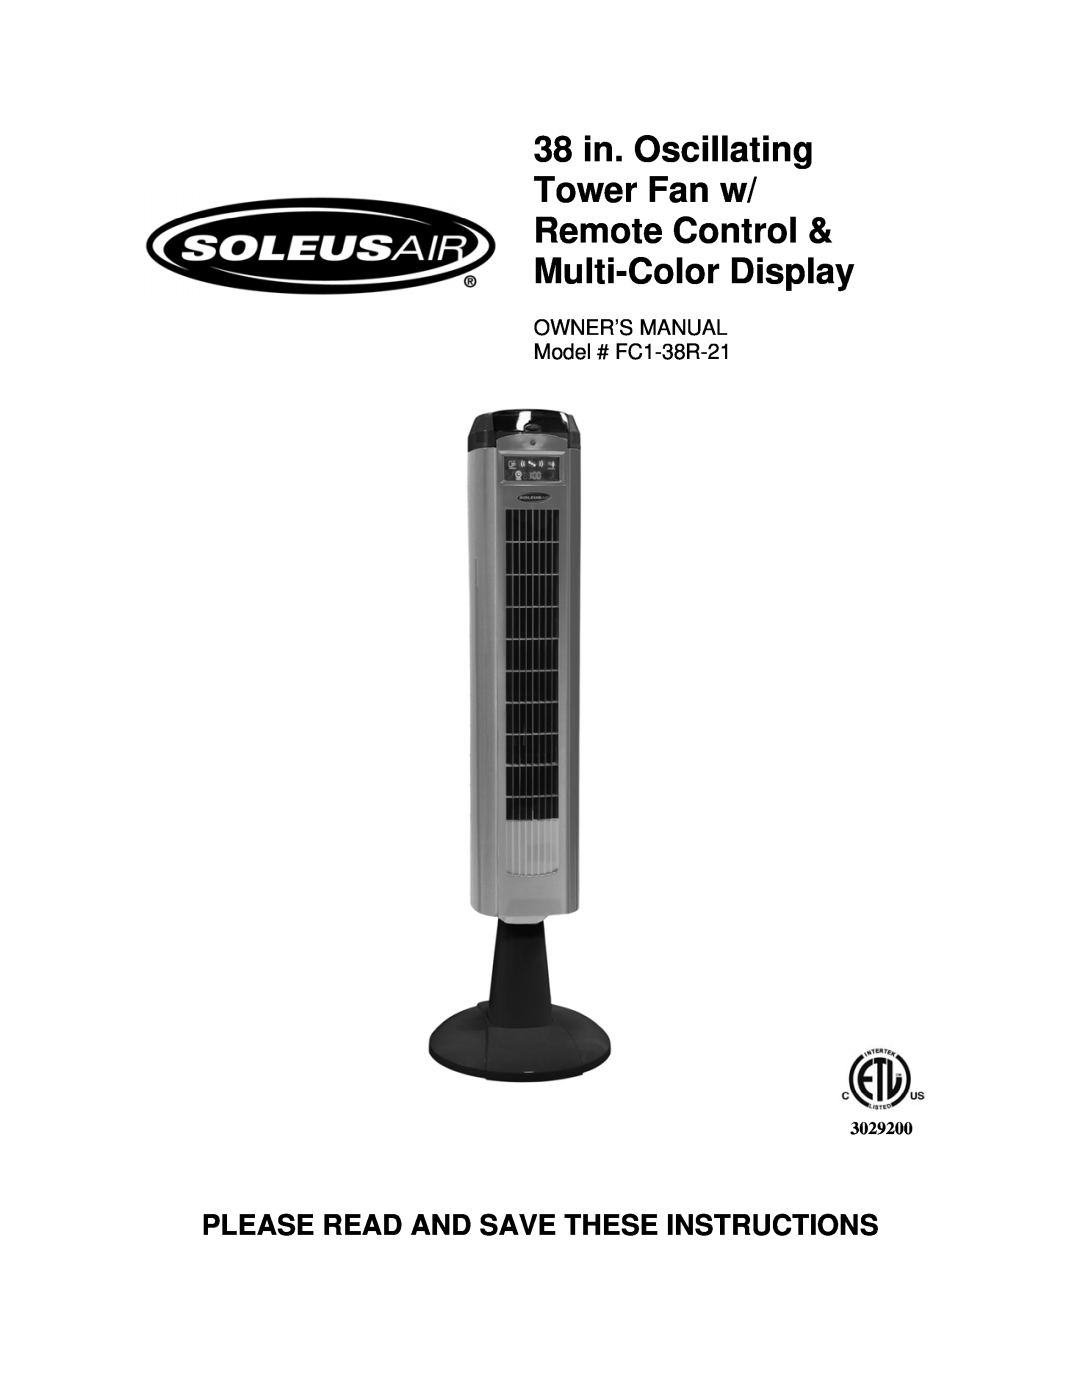 Soleus Air FC1-38R-21 owner manual Please Read And Save These Instructions, 3029200 